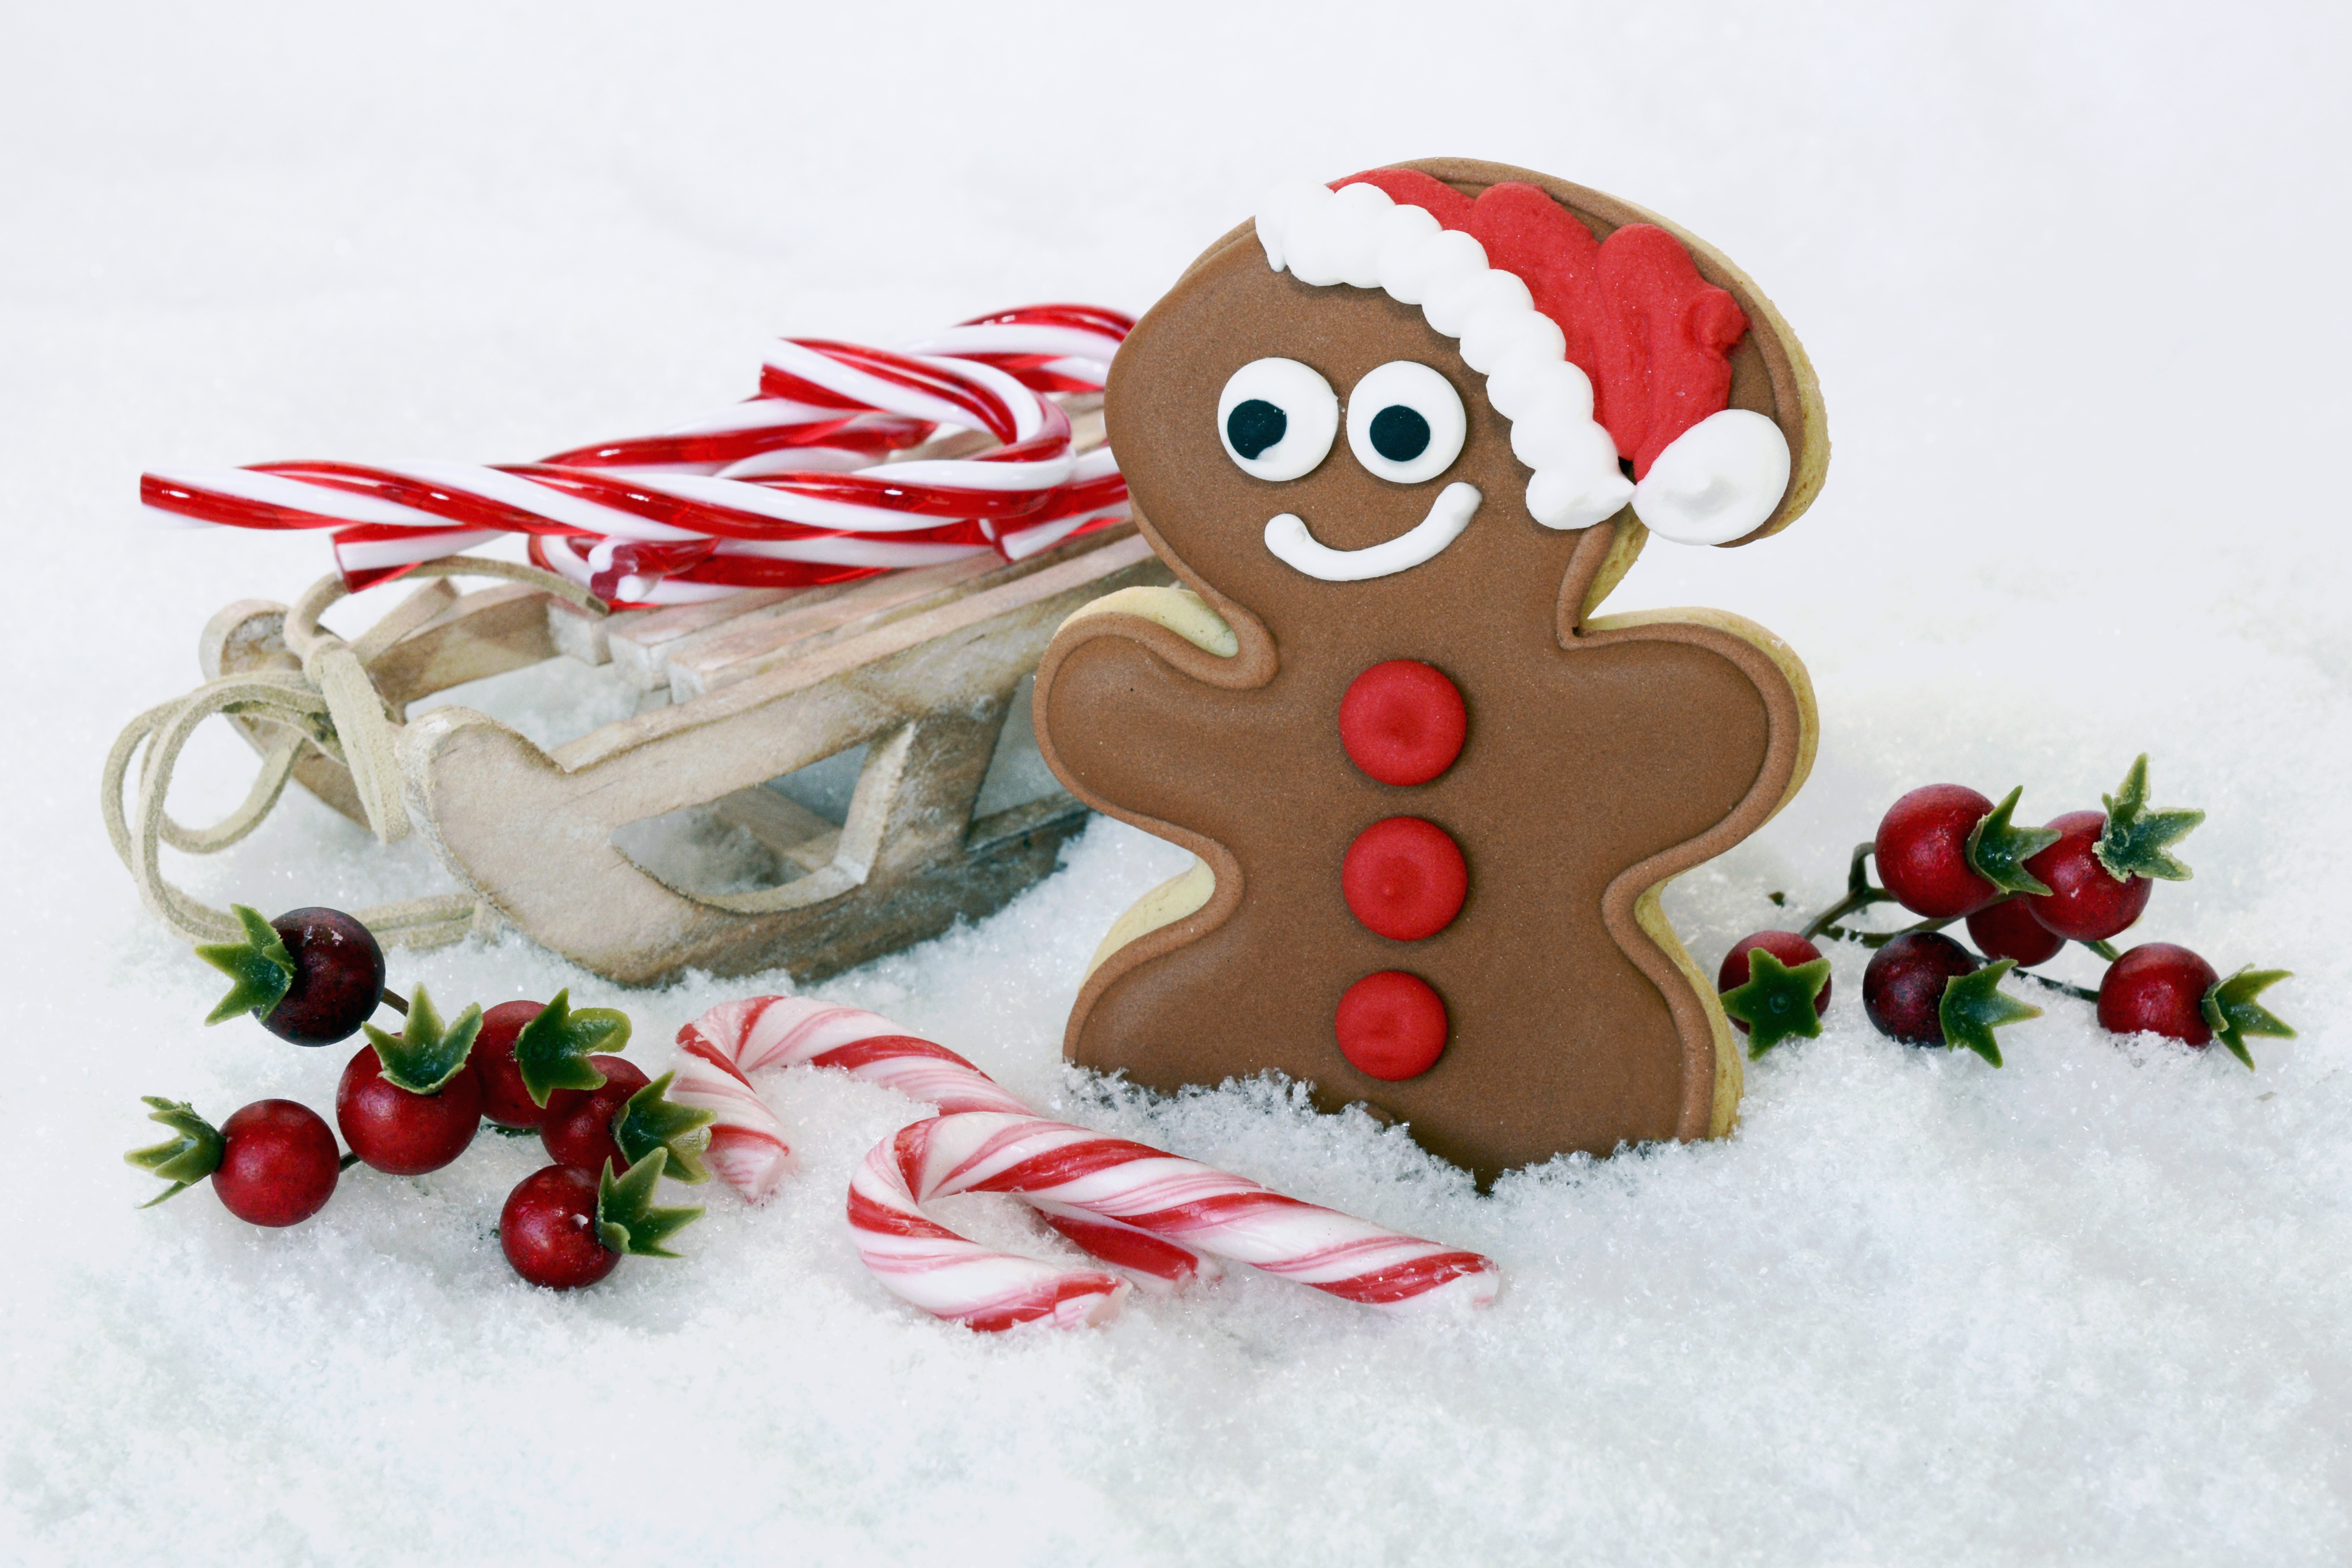 Christmas Gingerbread Man by annca